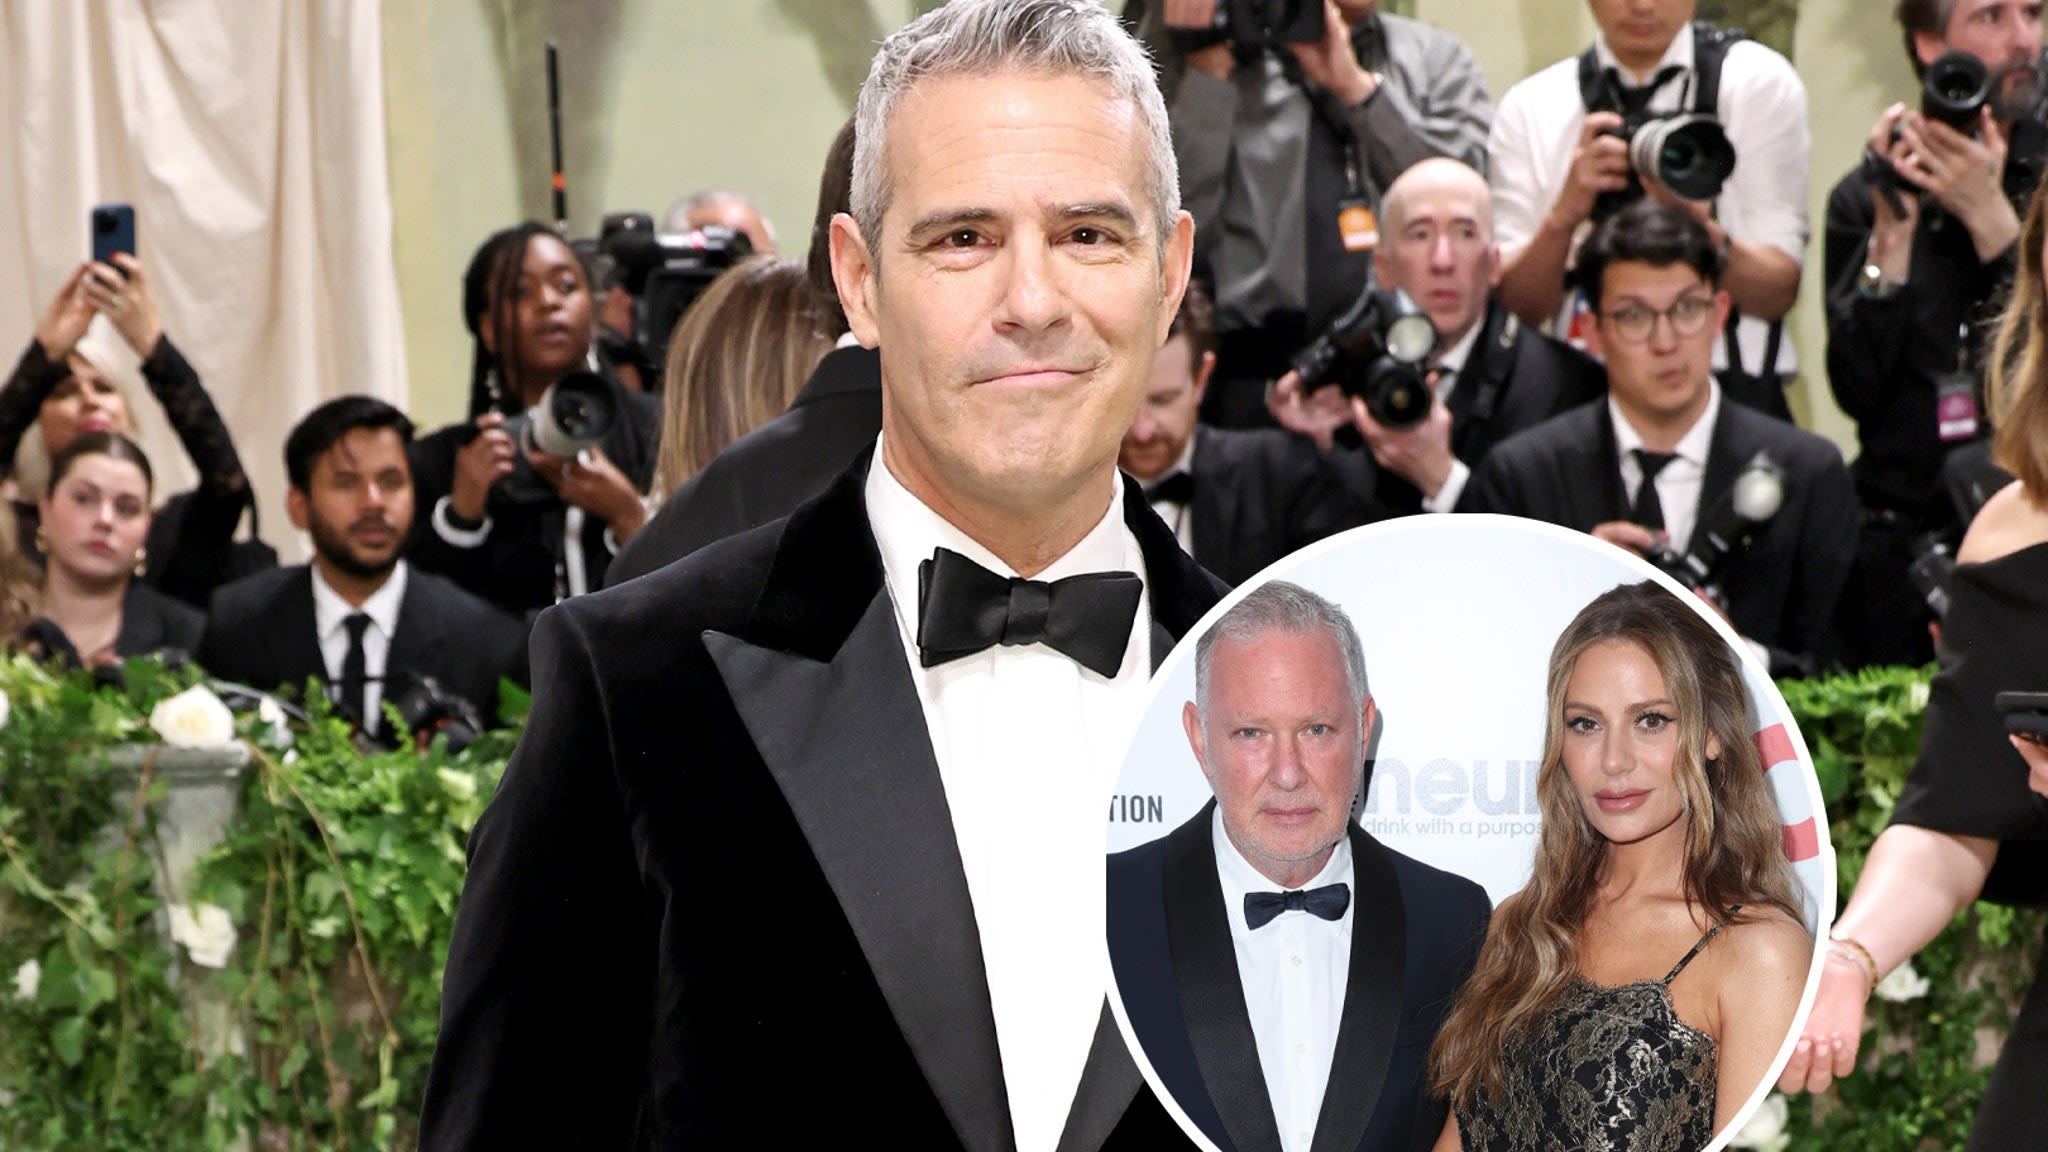 Andy Cohen Slams Speculation Dorit Kemsley and PK's Separation Is Publicity Stunt